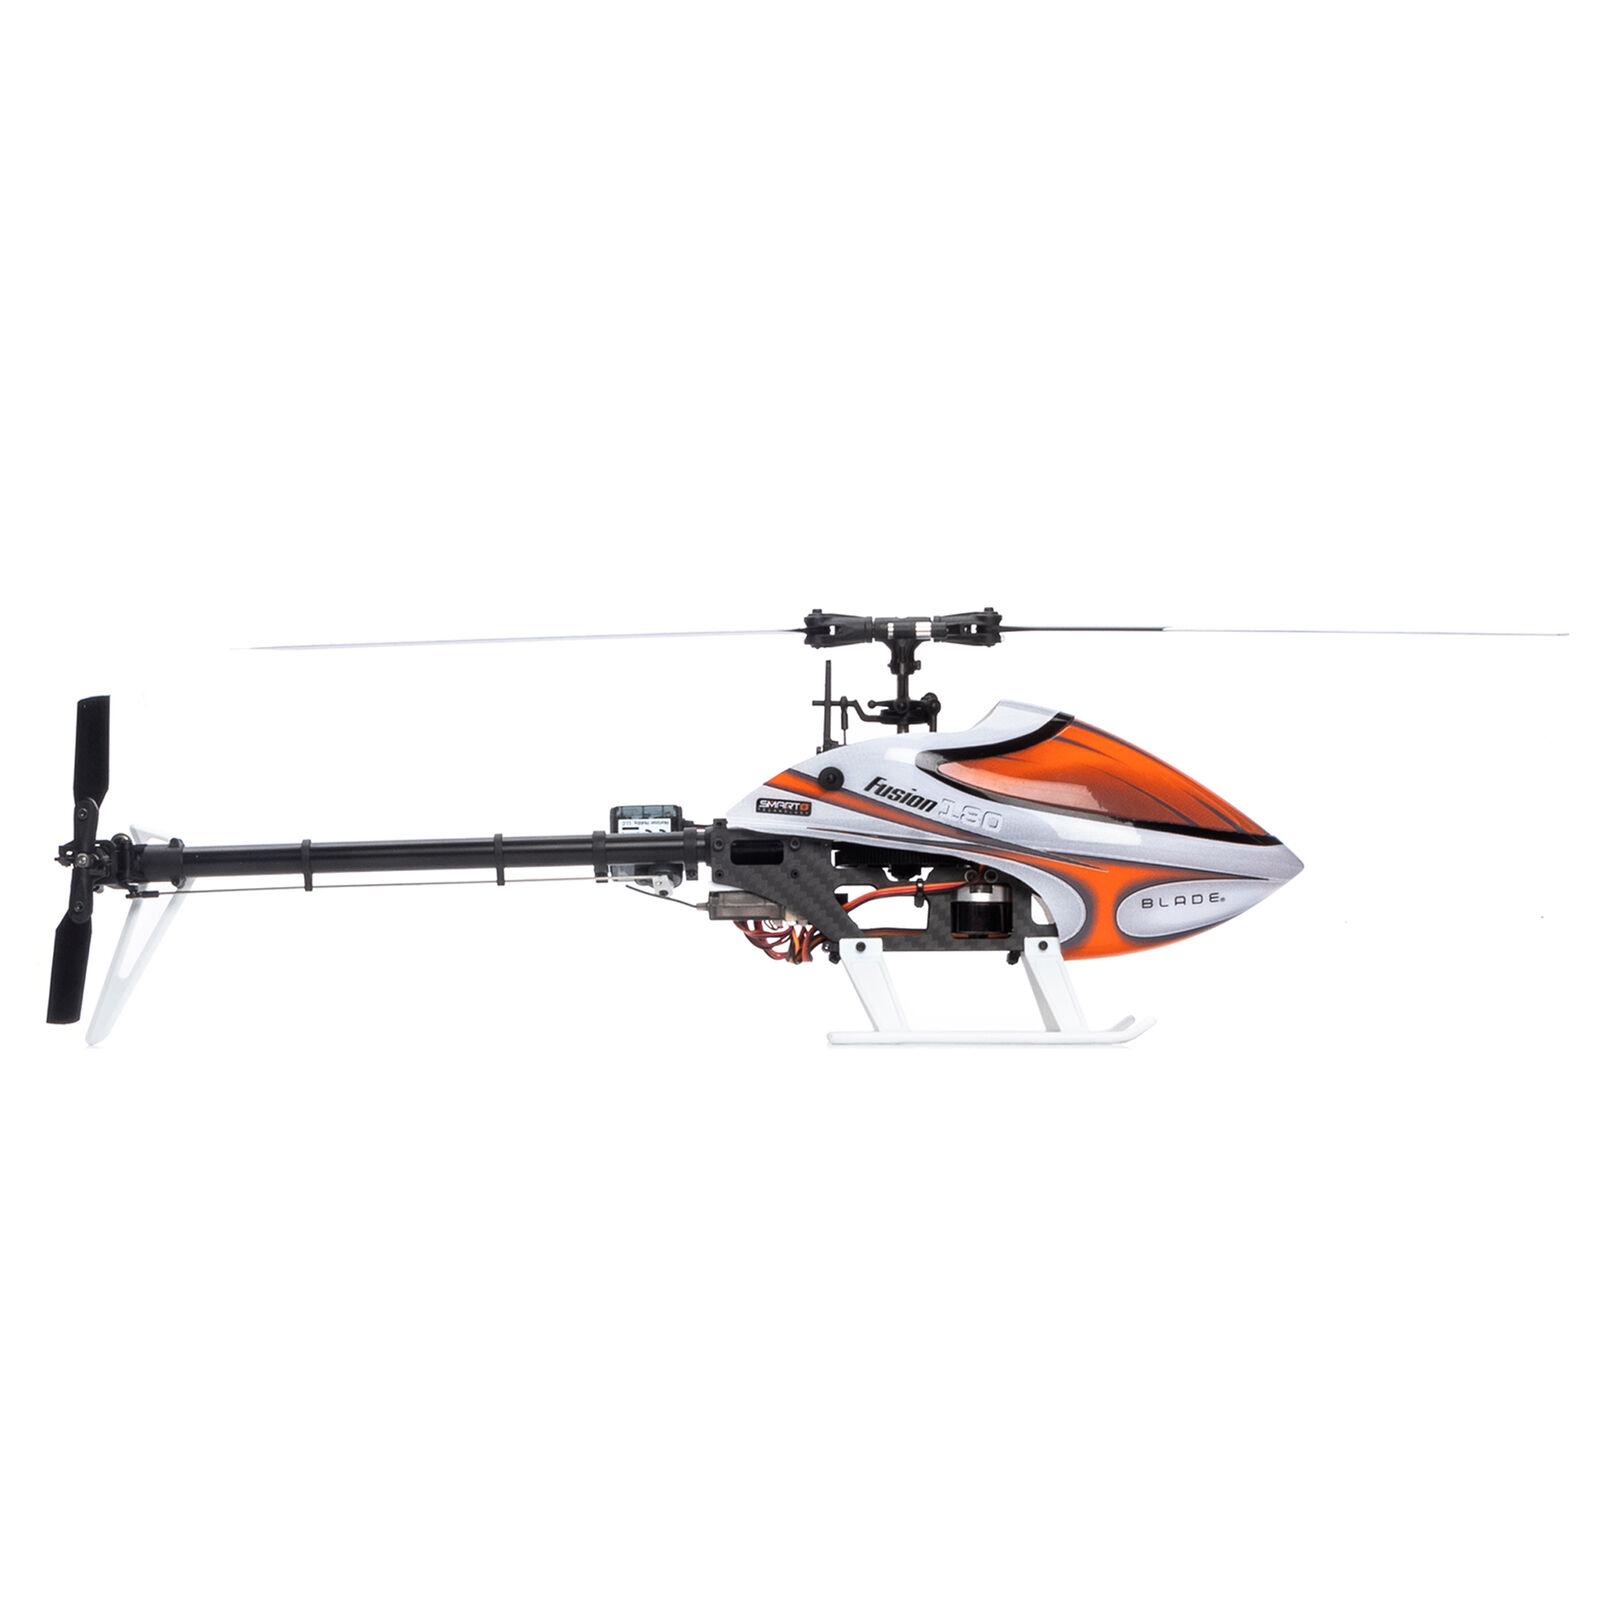 Blade Fusion 180 Smart Bnf Basic: Compact, Durable, and Versatile: The Blade Fusion 180 Smart BNF Basic Drone